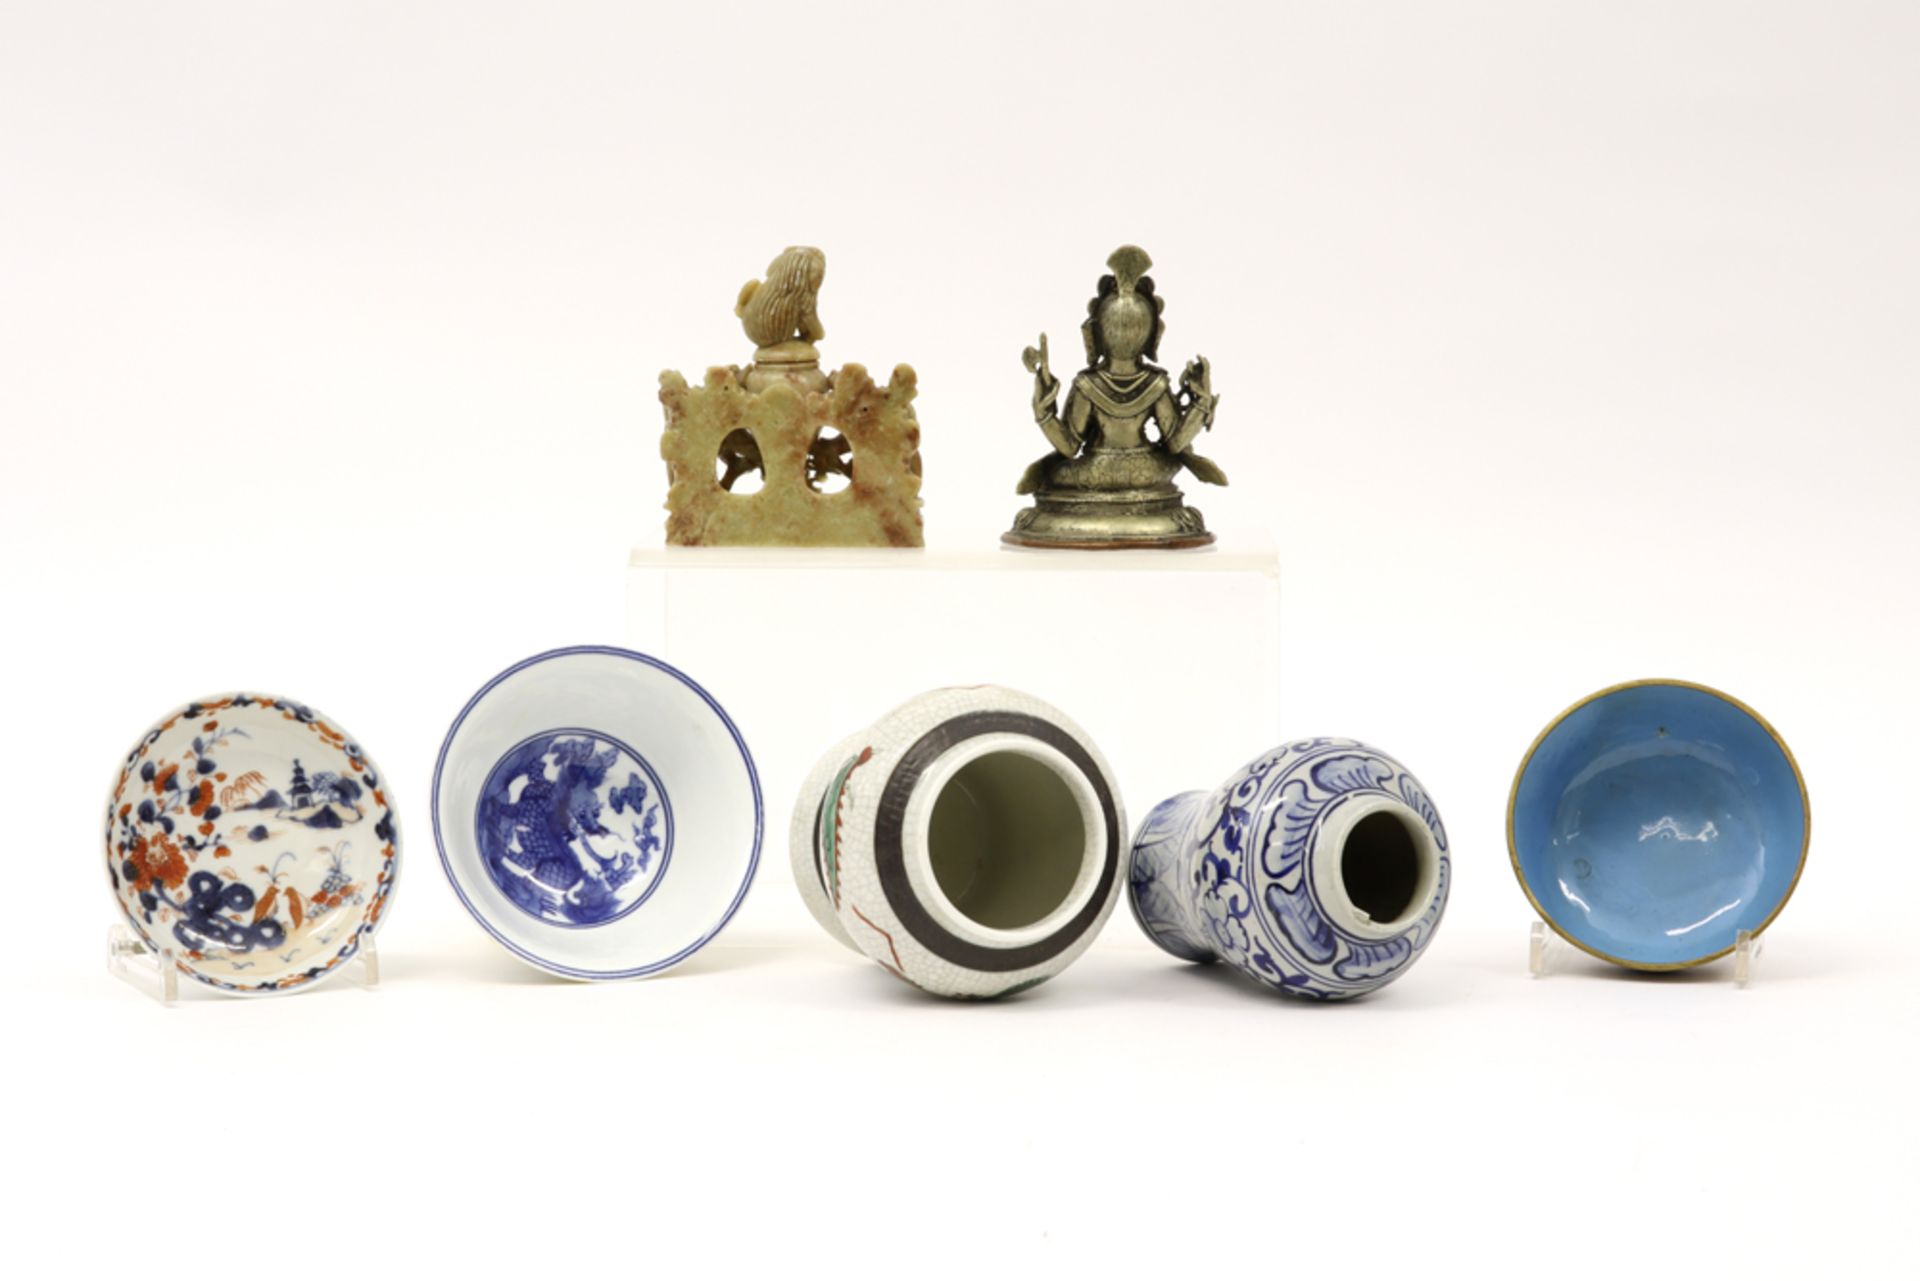 various lot with a small Buddha || Varia (7) met Chinese items en een kleine 'Boeddha' - Image 2 of 2